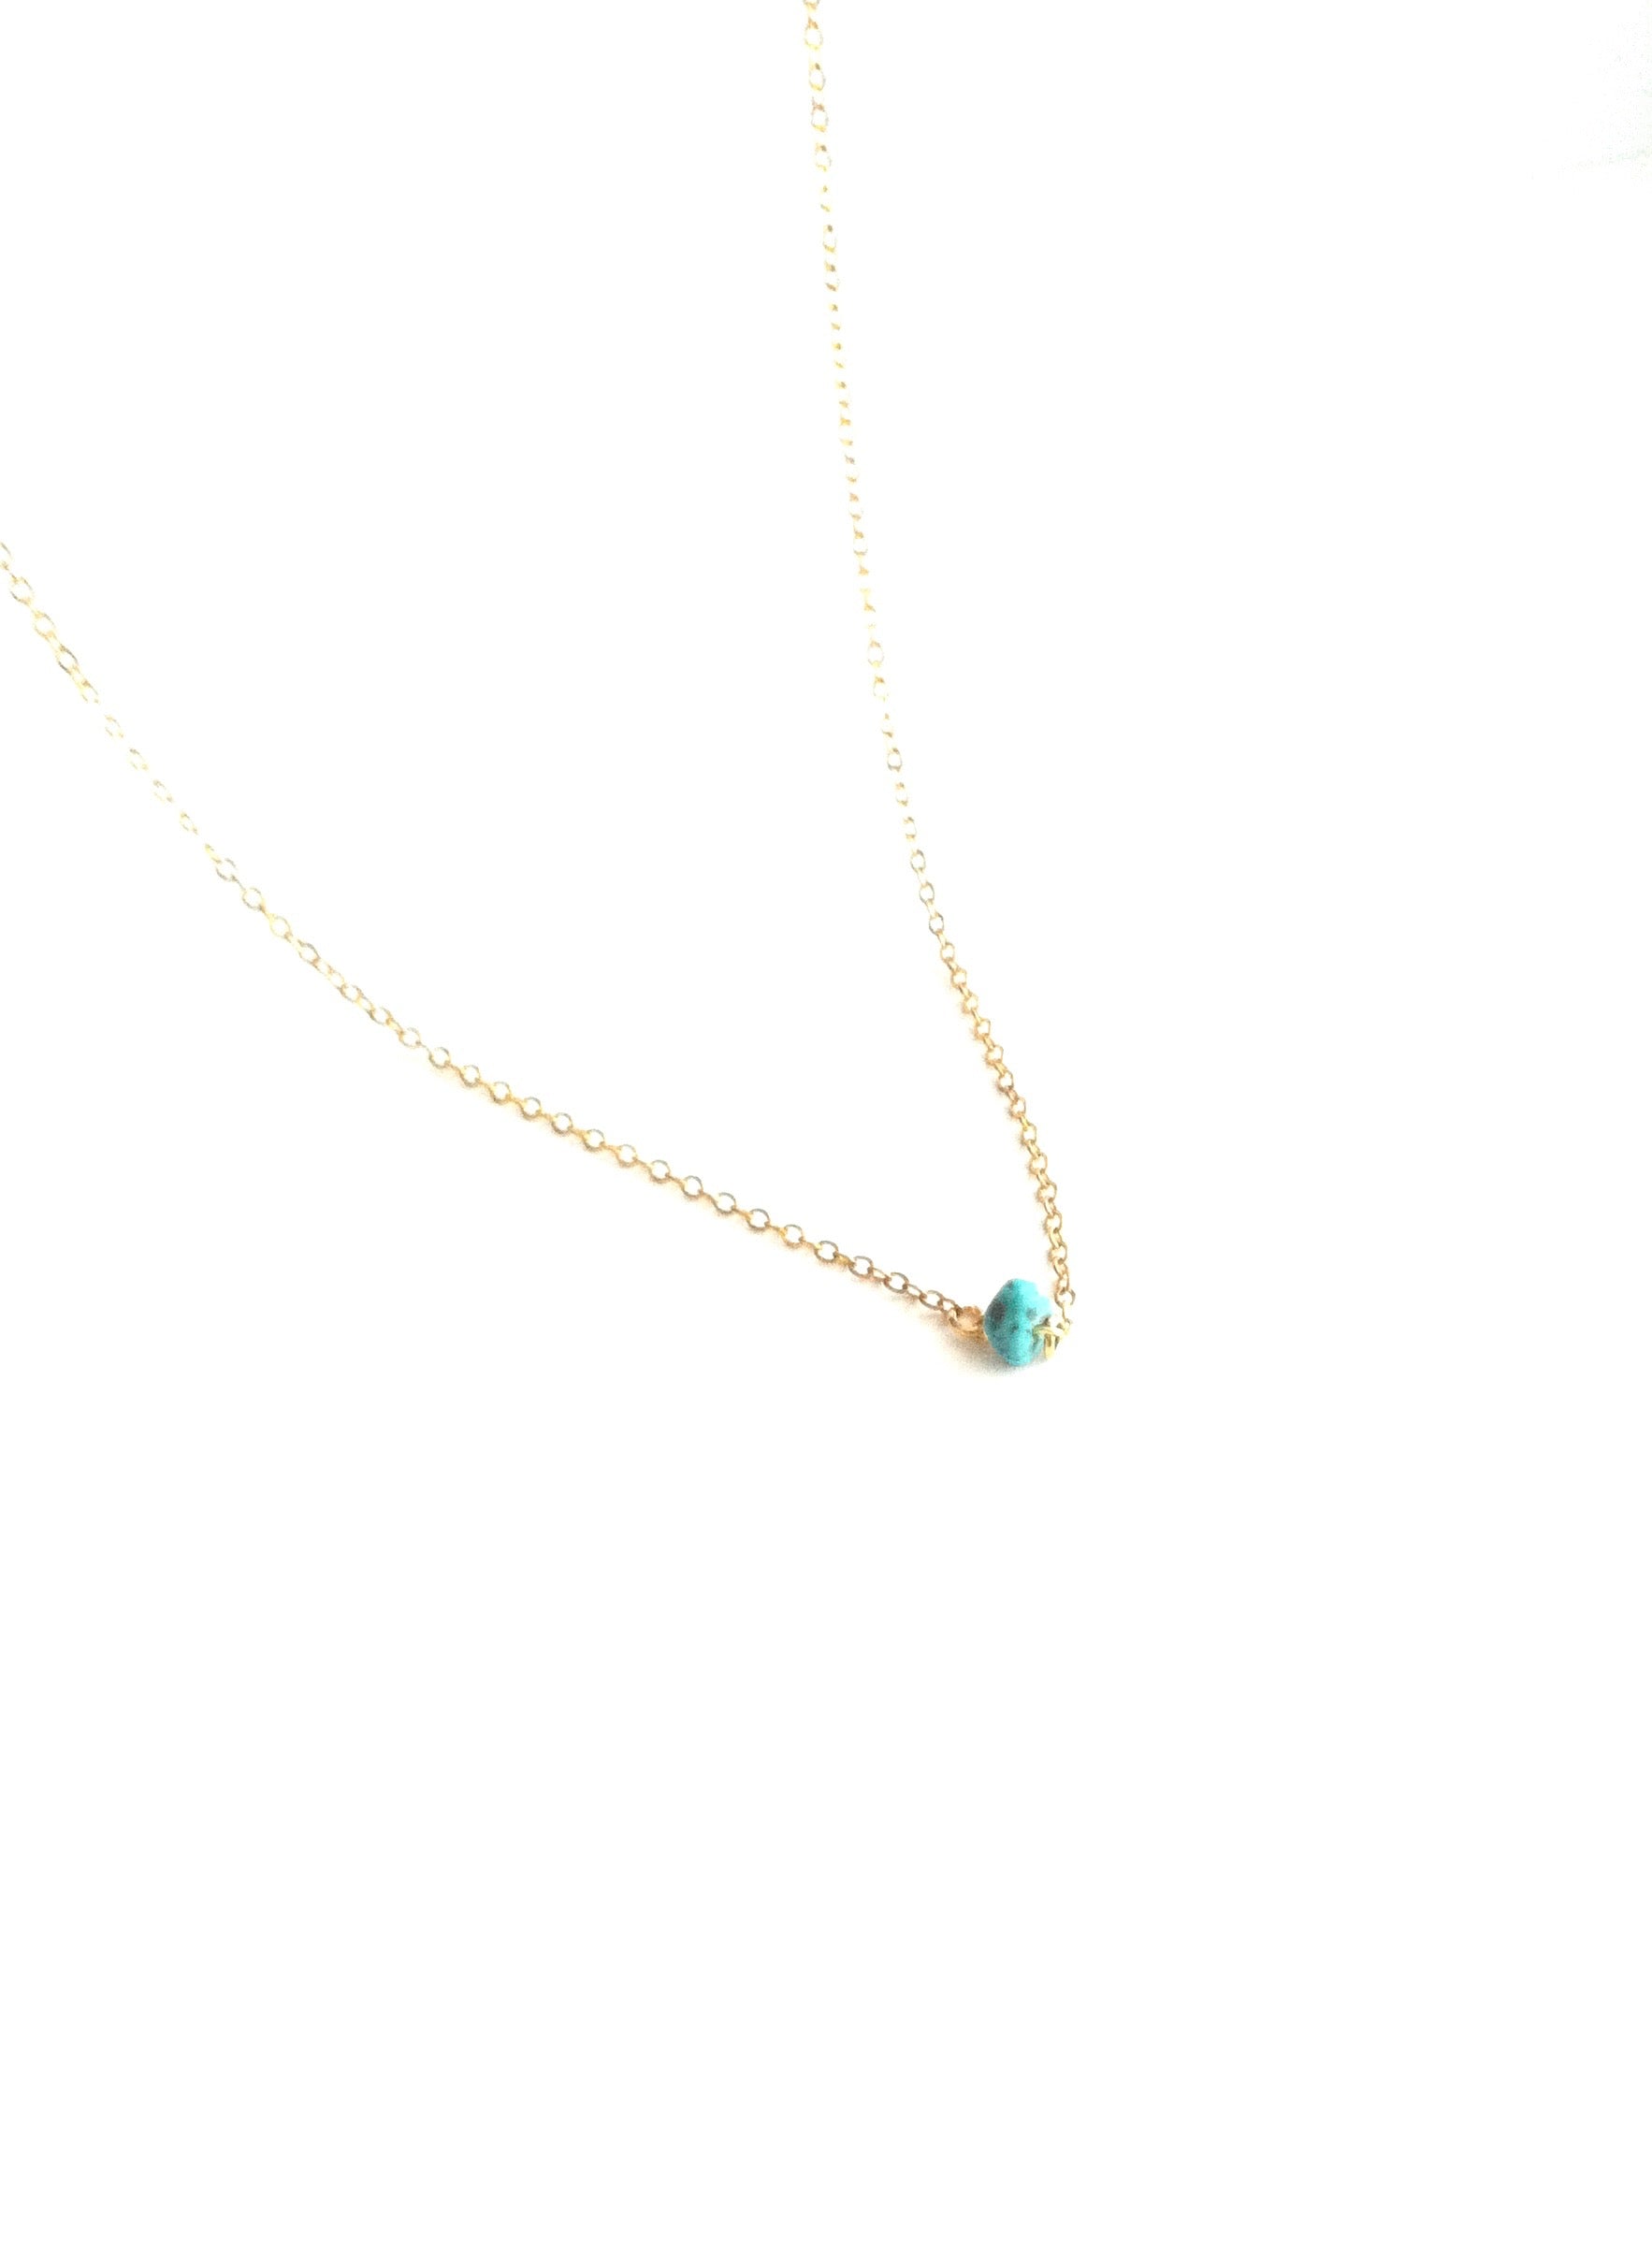 Tiny Dainty Turquoise Thin Chain Necklace | IB Jewelry